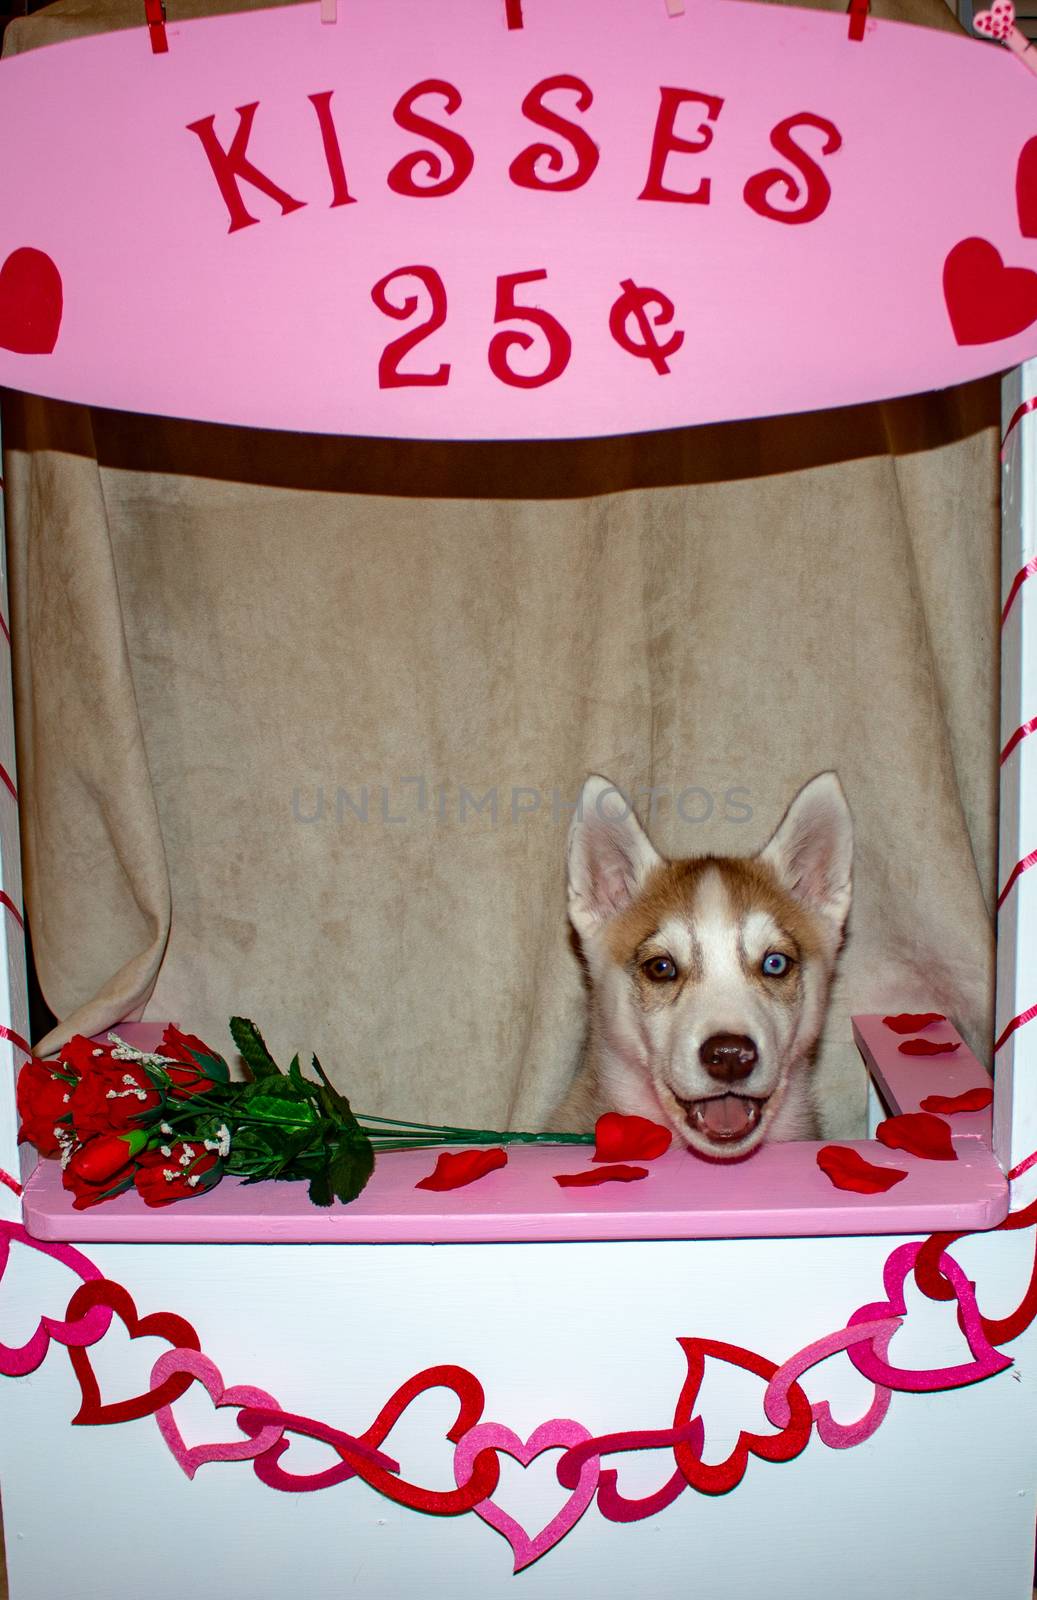 Siberian husky Dog in a Kissing Booth. Theme of valentines day and dog humour. great for concepts by mynewturtle1